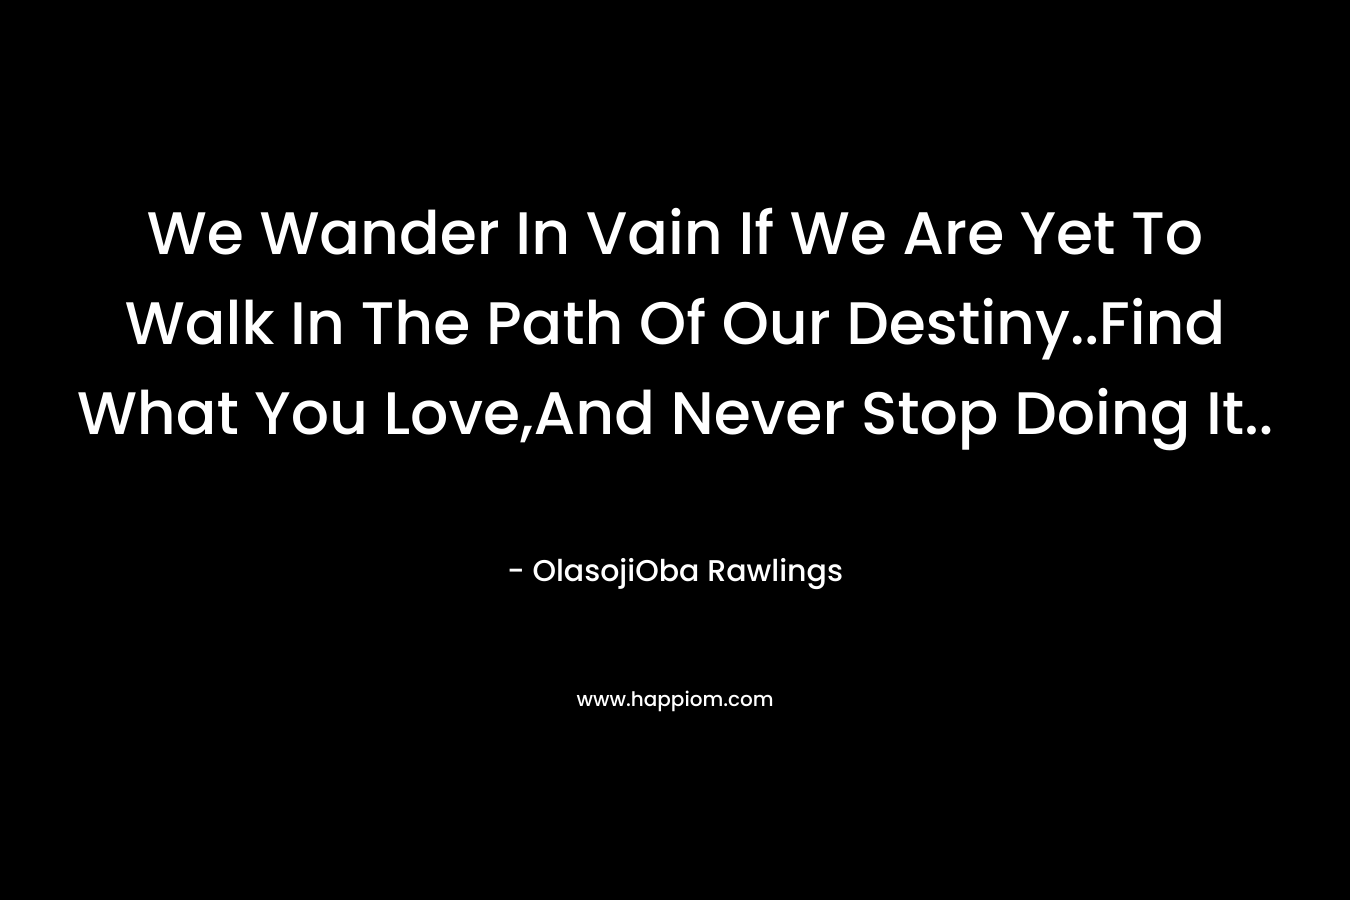 We Wander In Vain If We Are Yet To Walk In The Path Of Our Destiny..Find What You Love,And Never Stop Doing It..